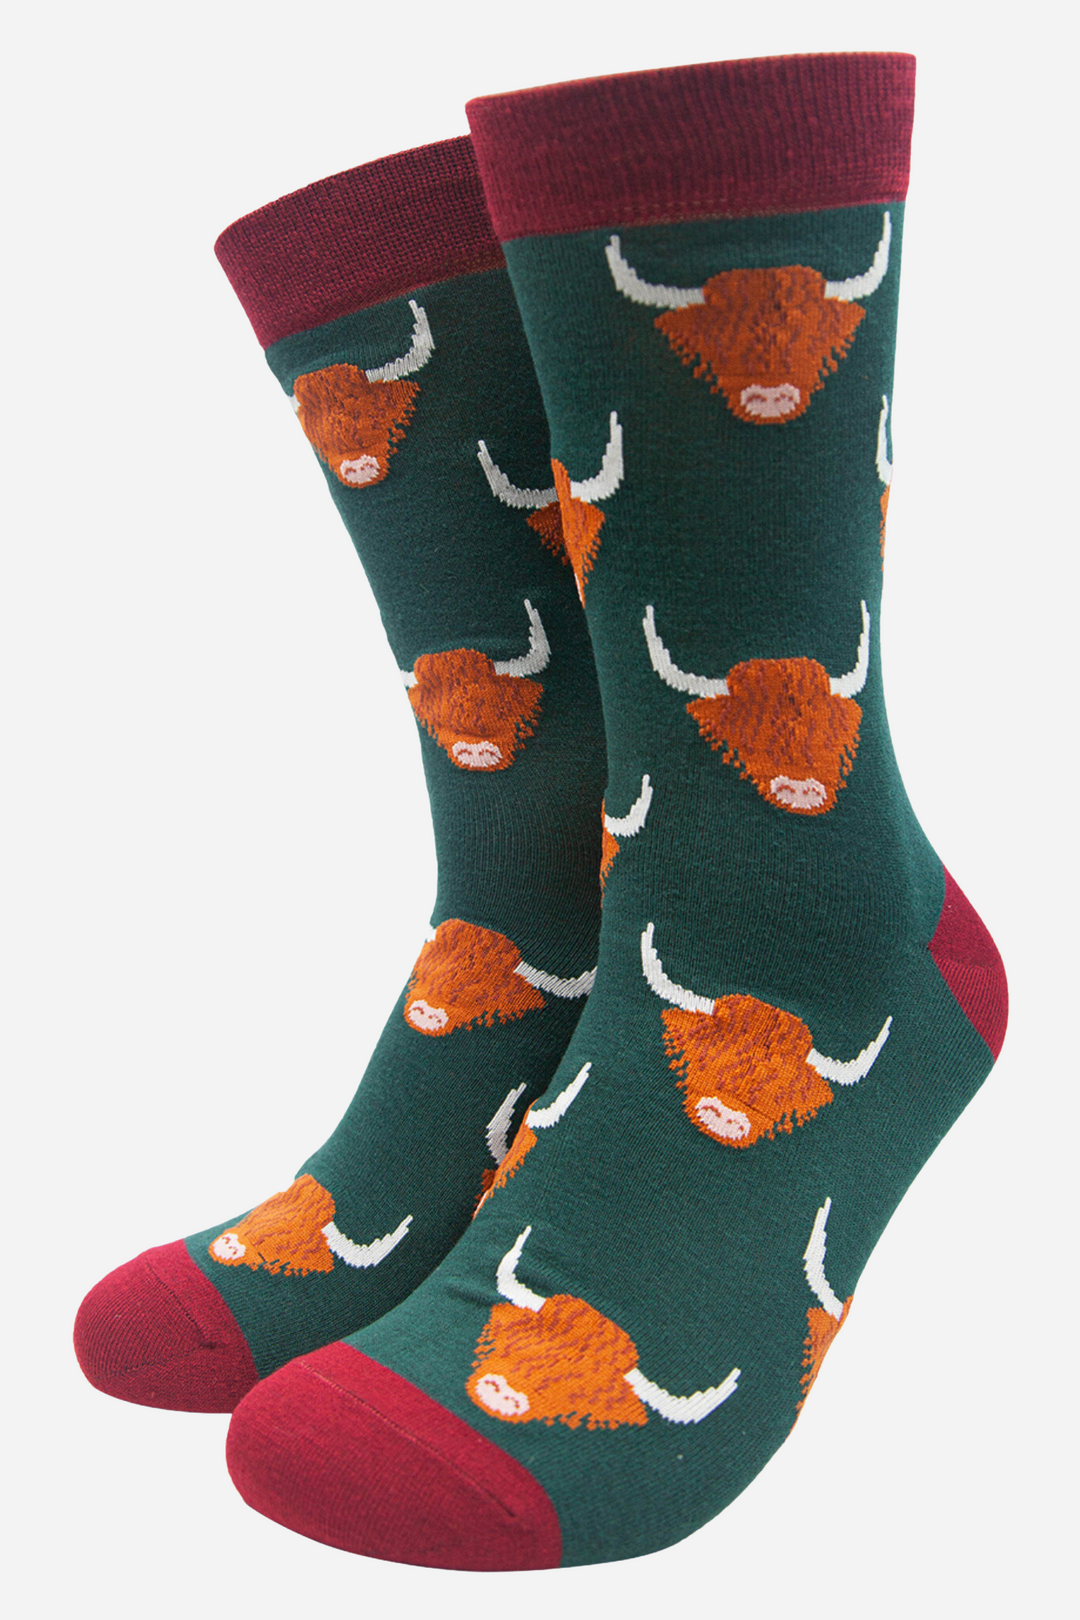 green socks with burgundy heel, toe and cuff with an all over orange highland cow pattern